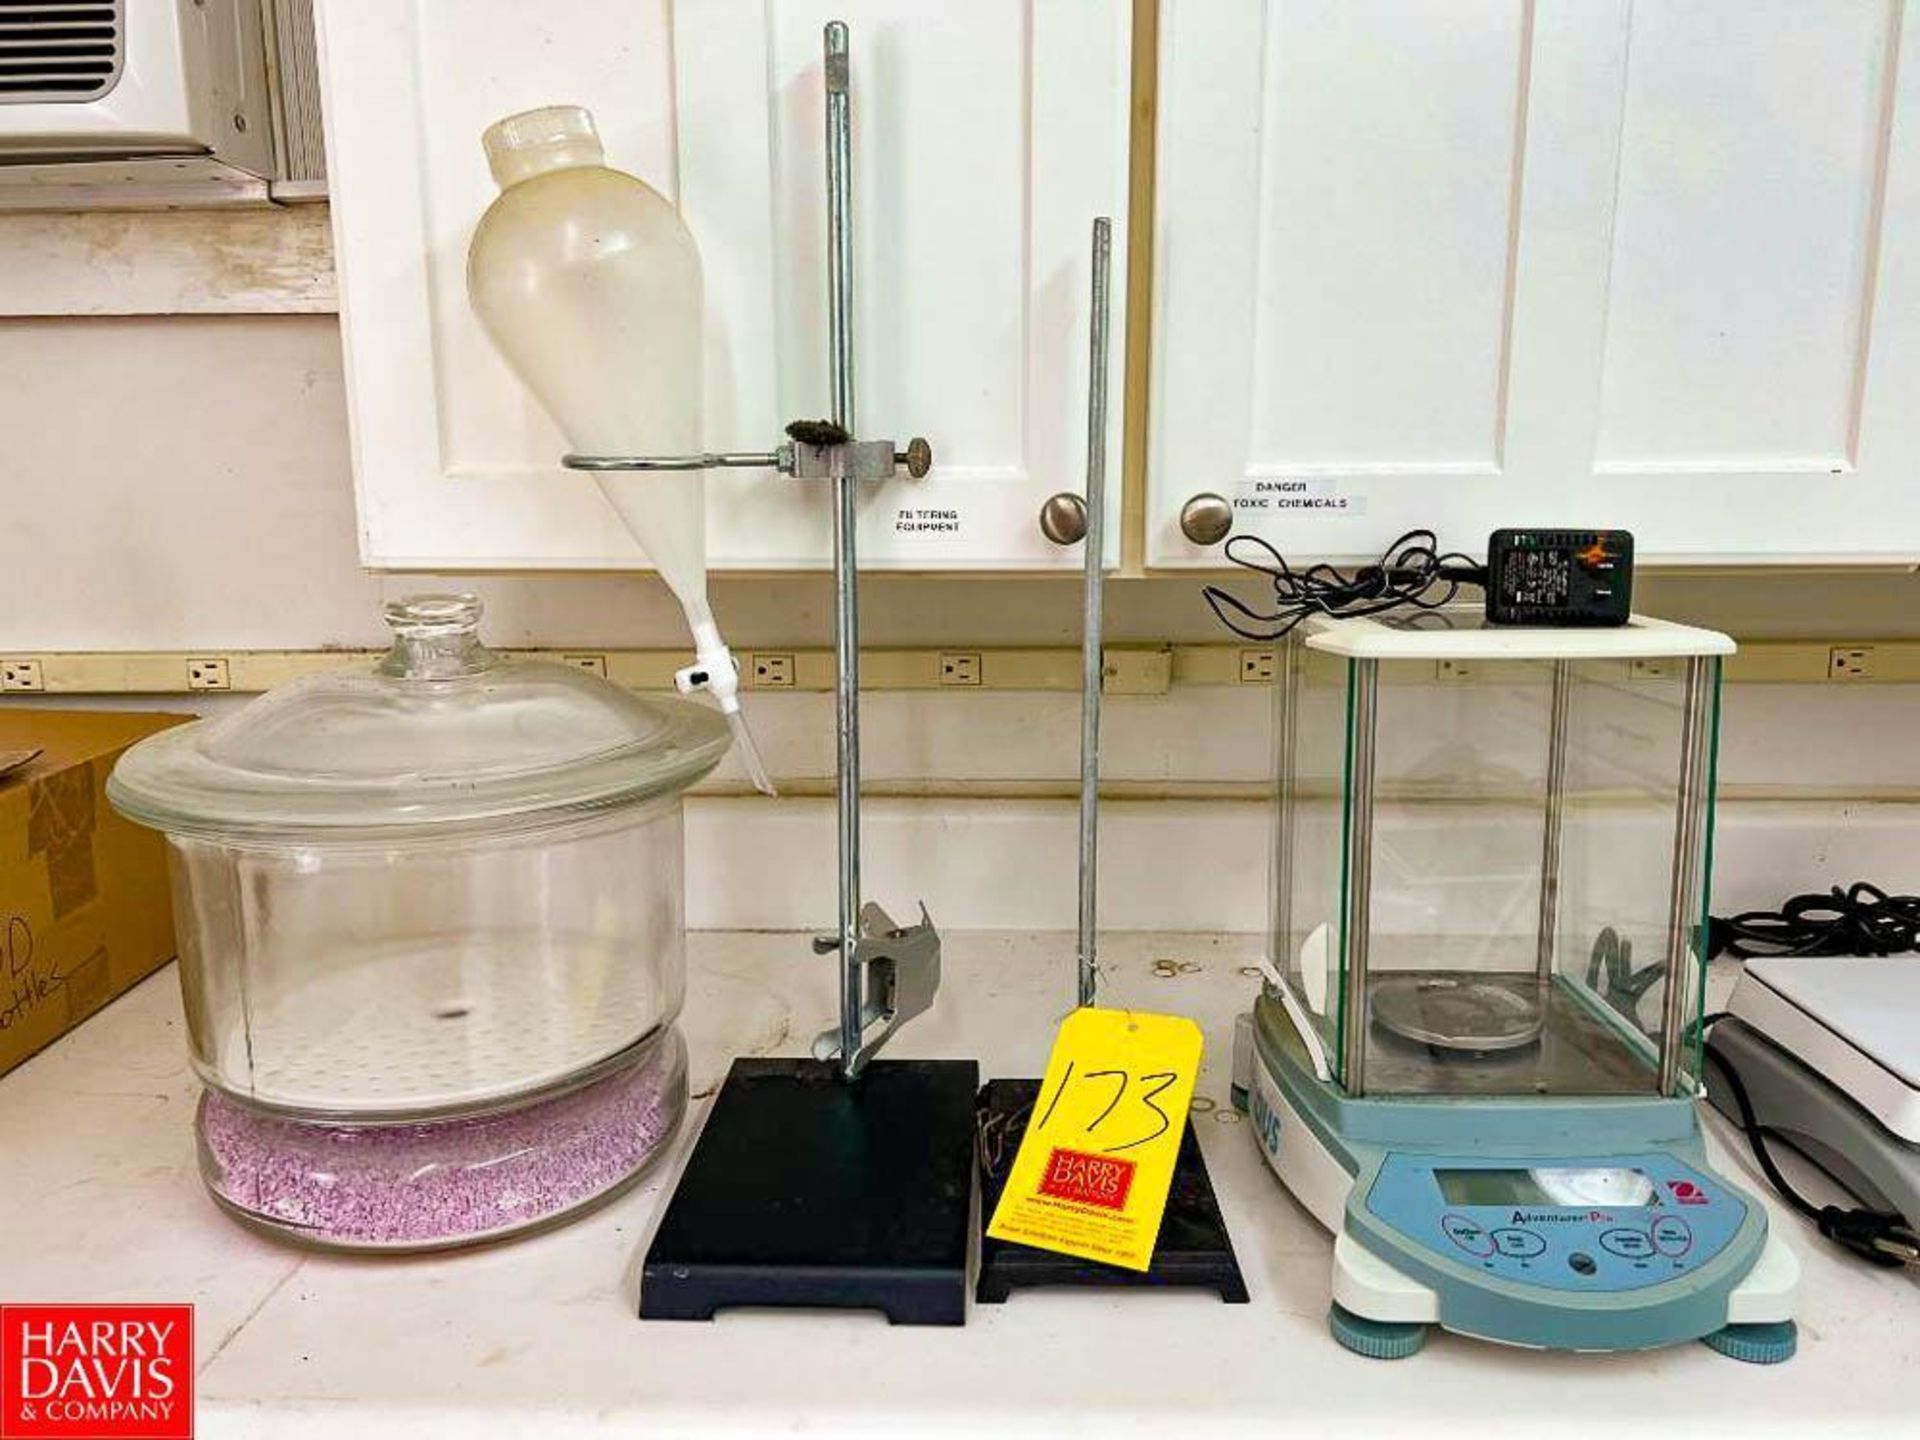 (2) Bunsen Burner Stands, Ohaus Adventurer Pro Scale, (2) VWR Stirrers, Hach DRB200 and Phipps &